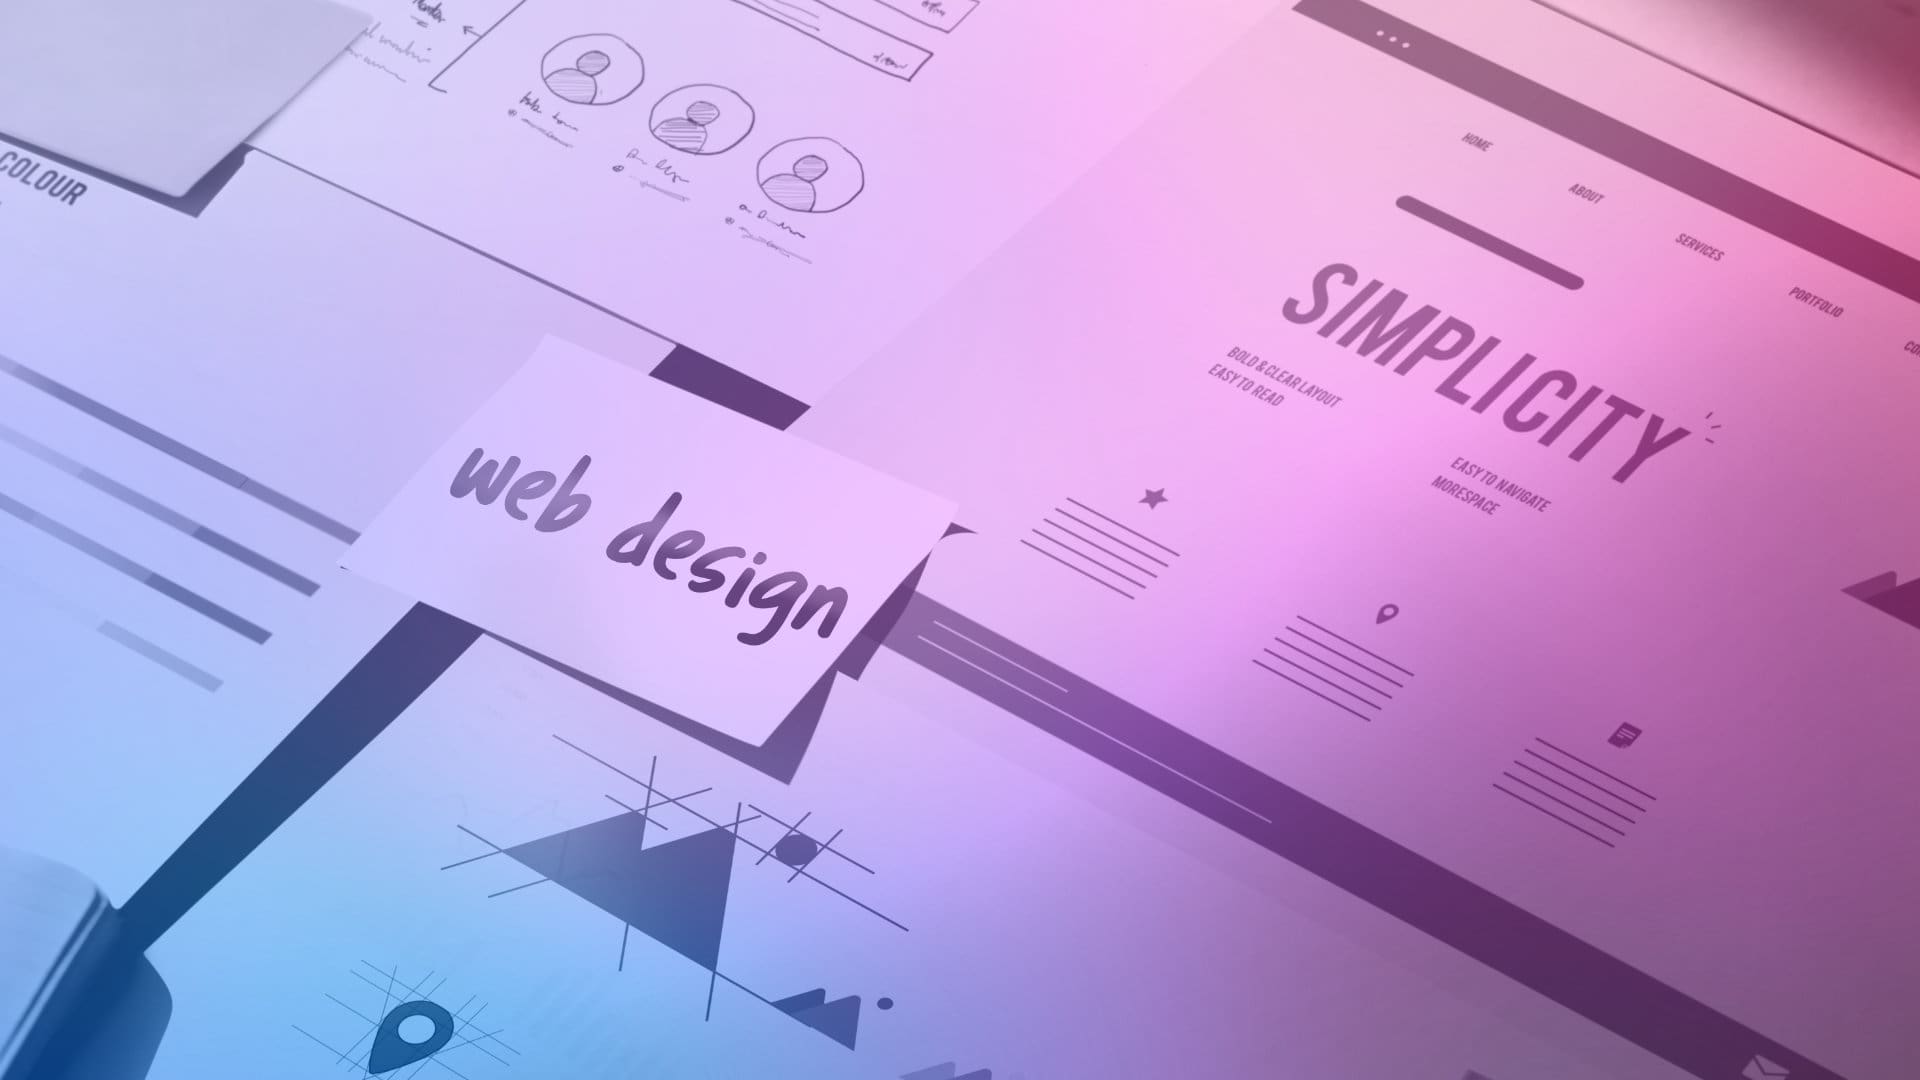 The impact of your website design on first impressions of customers can make or break their decision to engage further with your business.